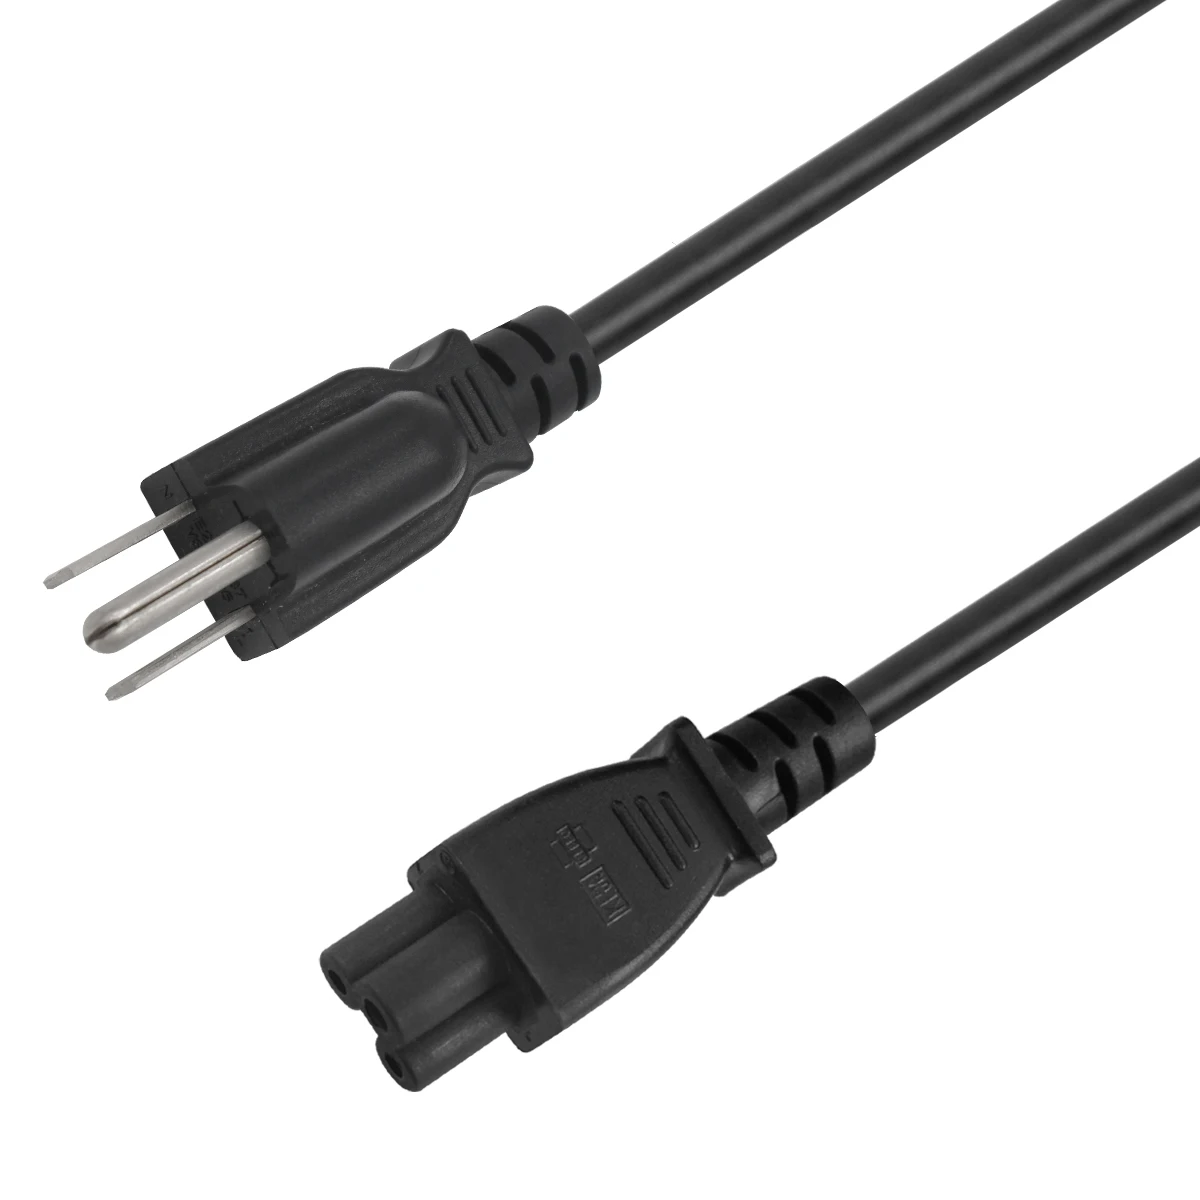 3Prong Plug with Pigtail Open Wire Power Cord 17